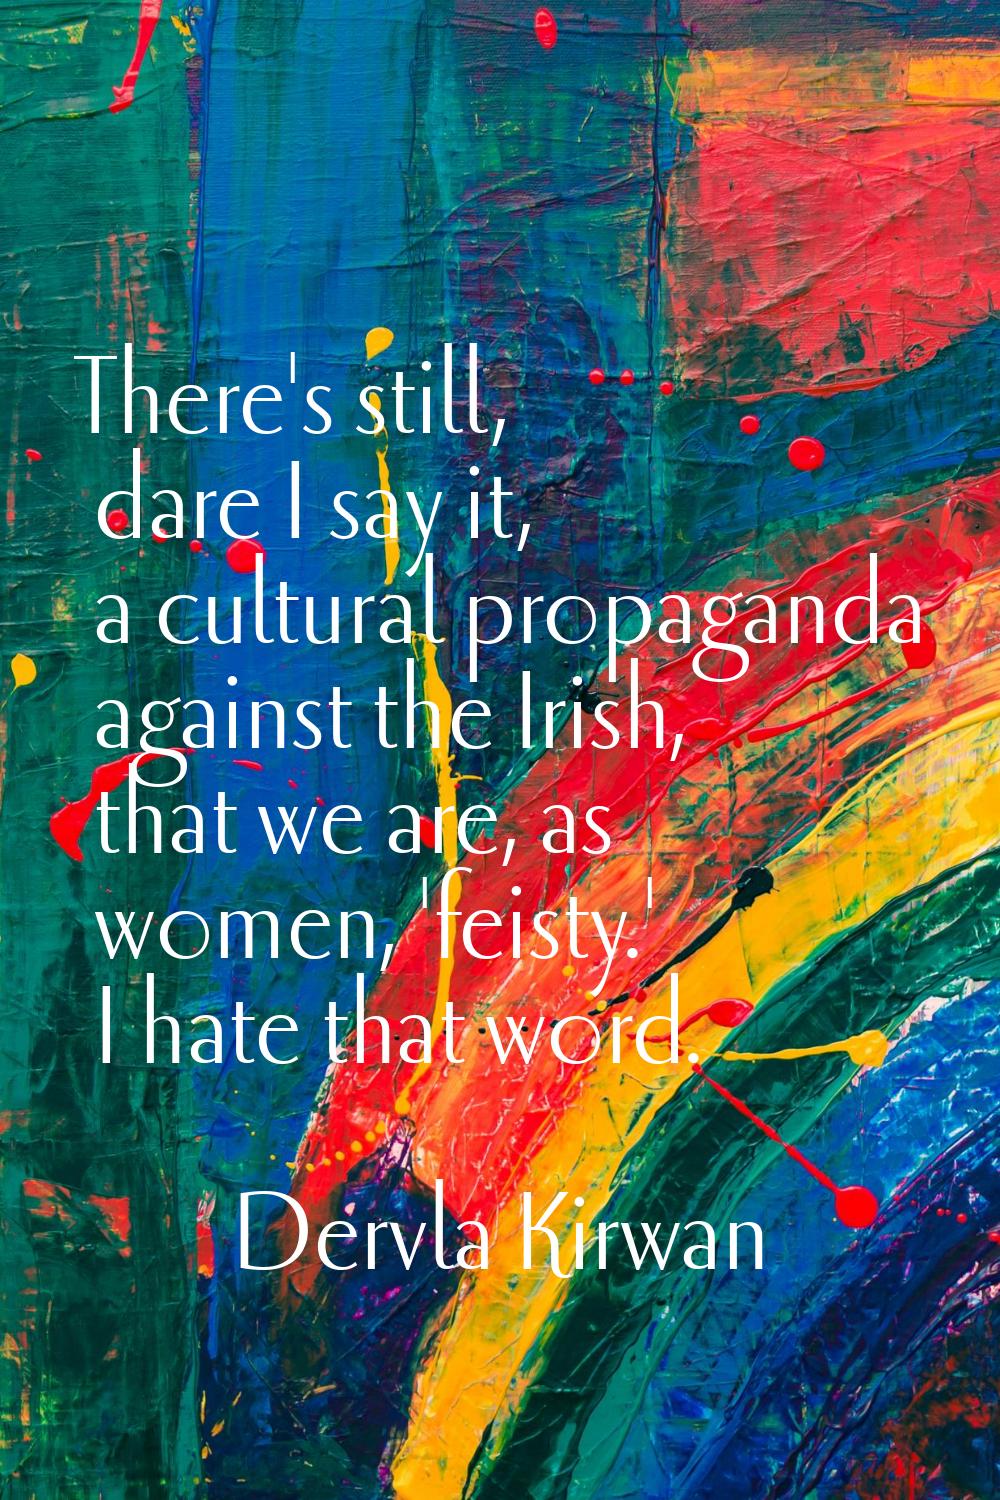 There's still, dare I say it, a cultural propaganda against the Irish, that we are, as women, 'feis